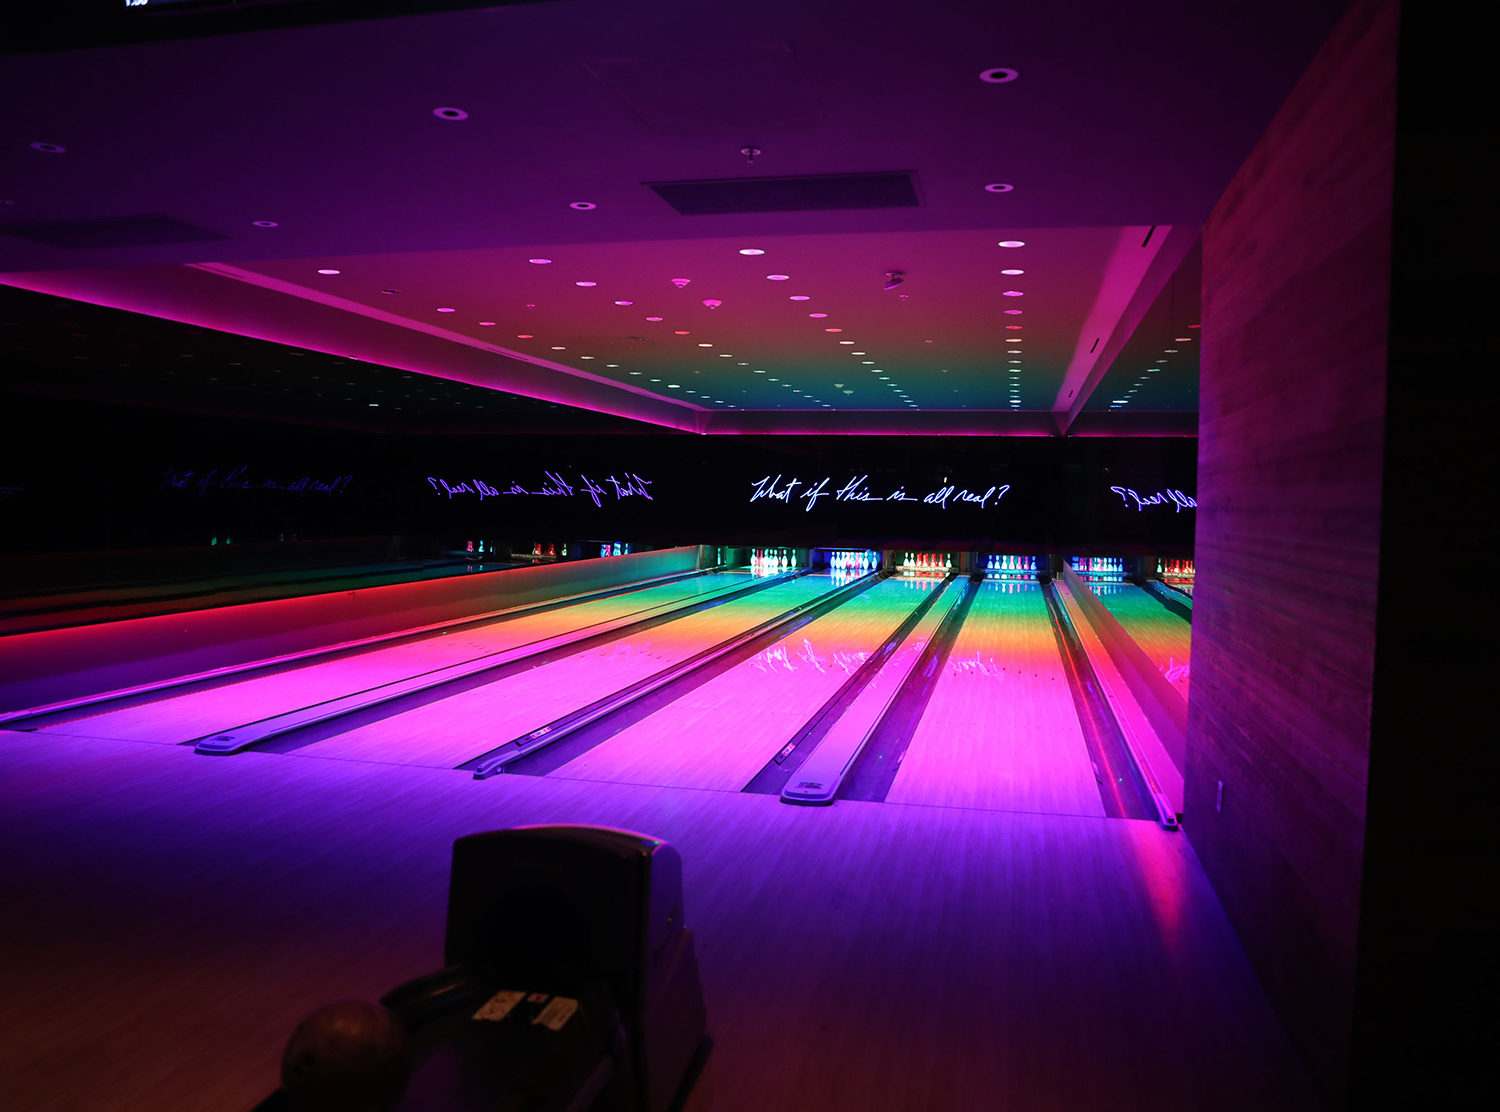 The Miami Beach EDITION If you are lost for how to spend time, bowling is an option